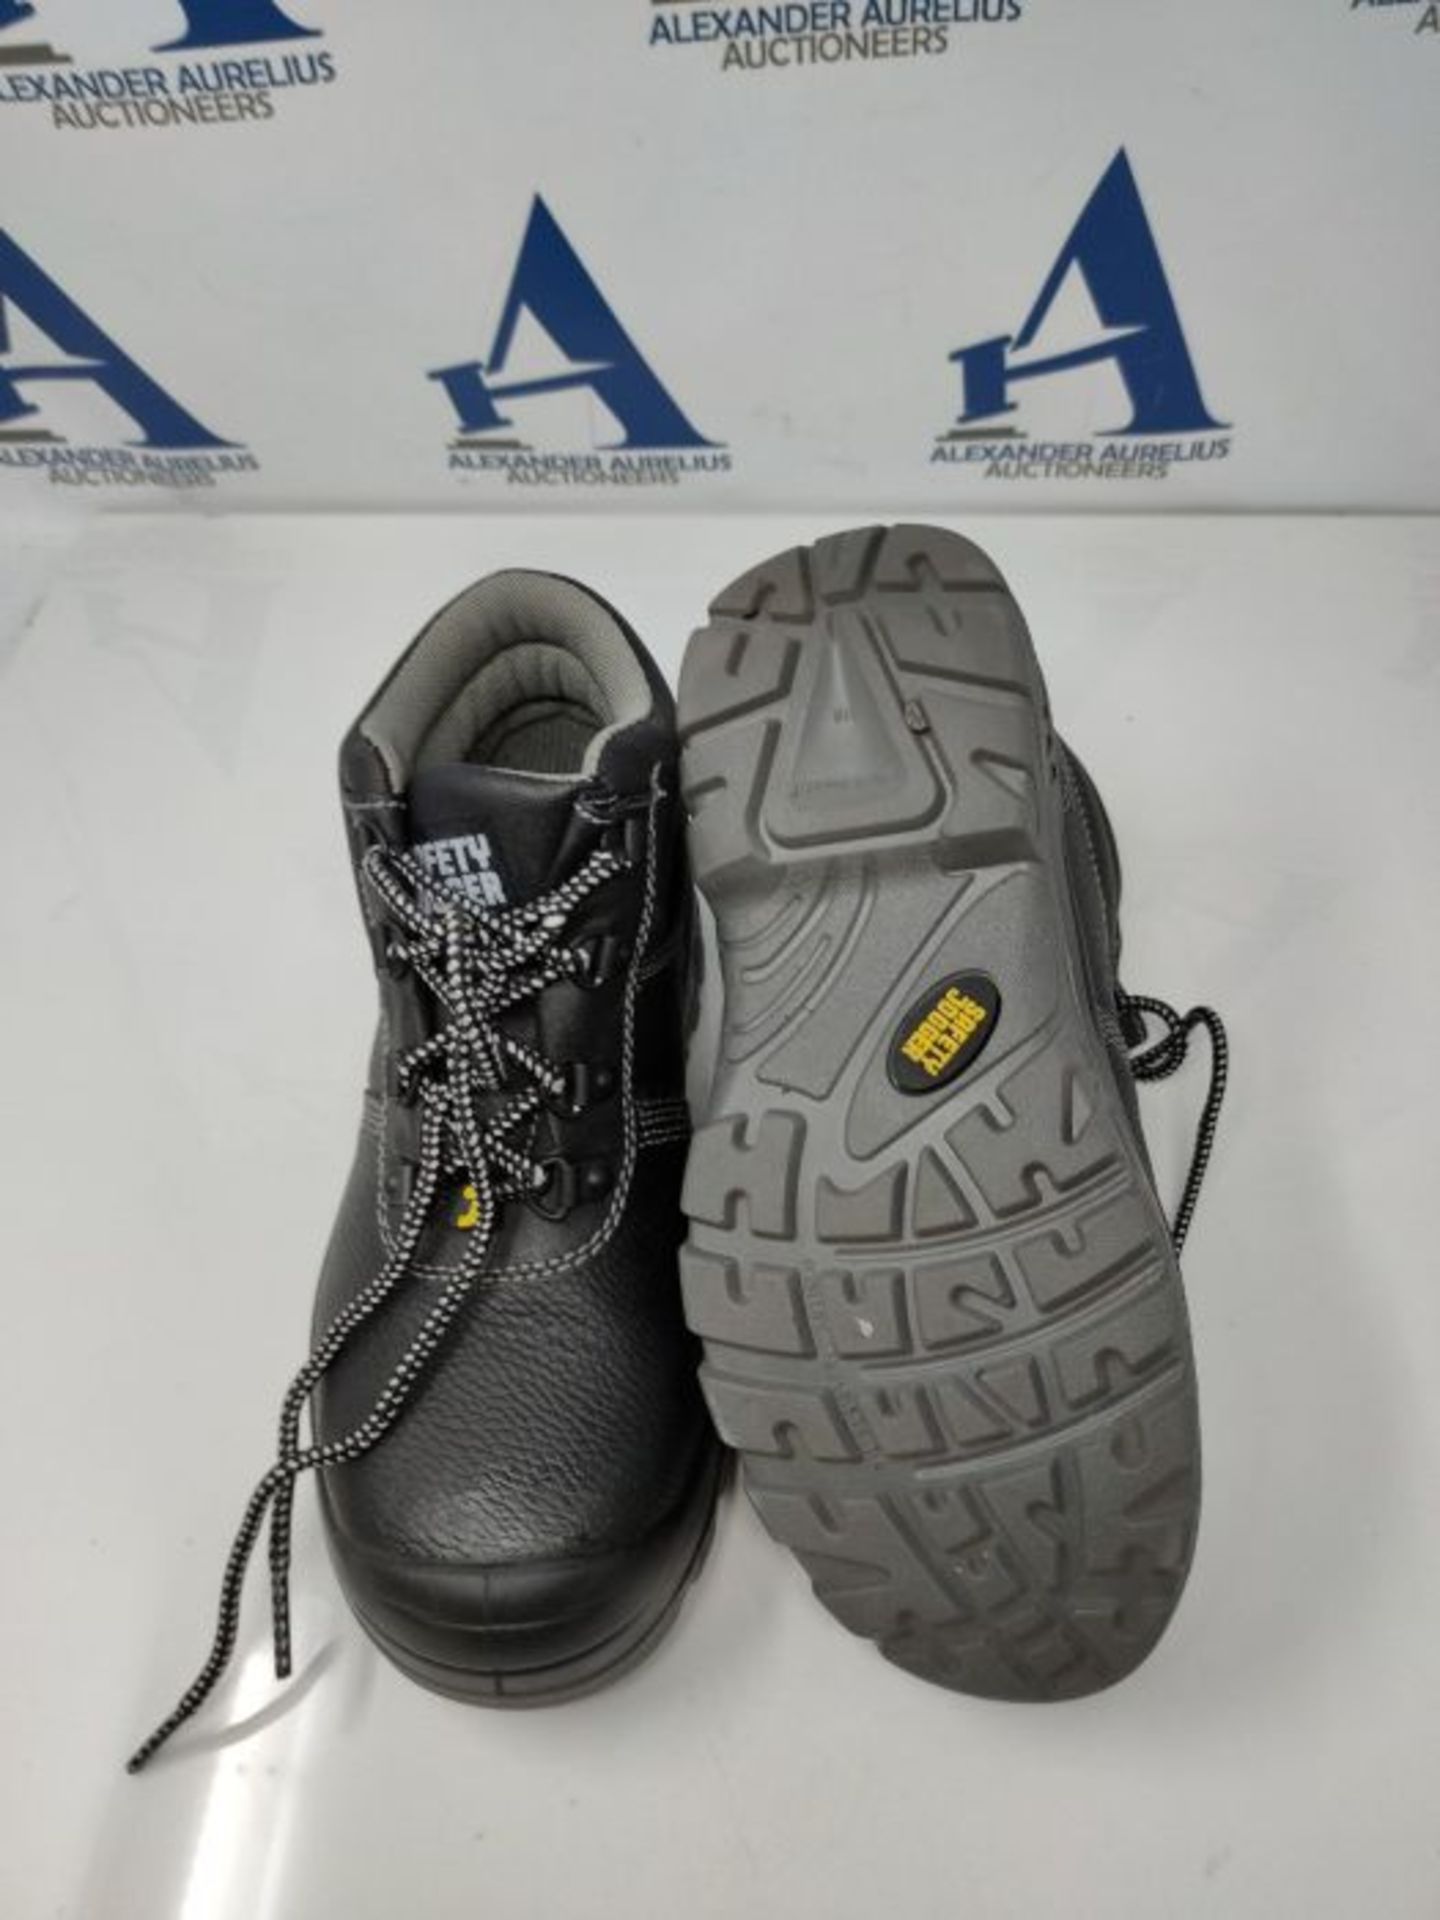 SAFETY JOGGER Safety Boot - BESTBOY - Steel Toe Cap S3/S1P Work Shoe for Men or Women, - Image 3 of 3